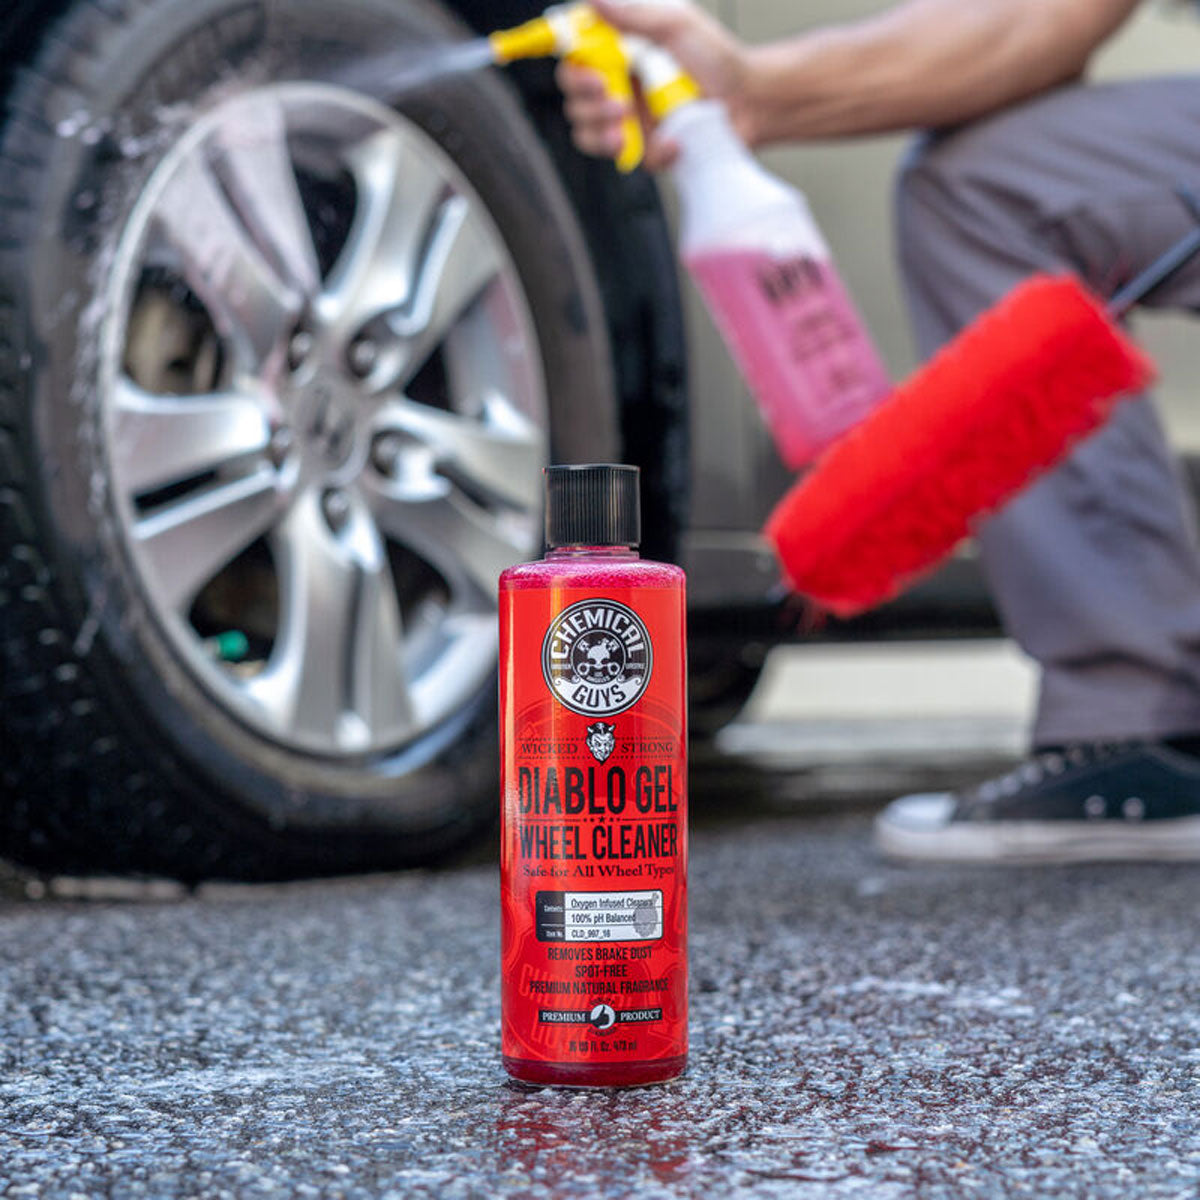 Chemical Guys Diablo Gel Wheel & Rim Cleaner Concentrated: Tough on dirt, pH-neutral on alloys & rims! - in action 